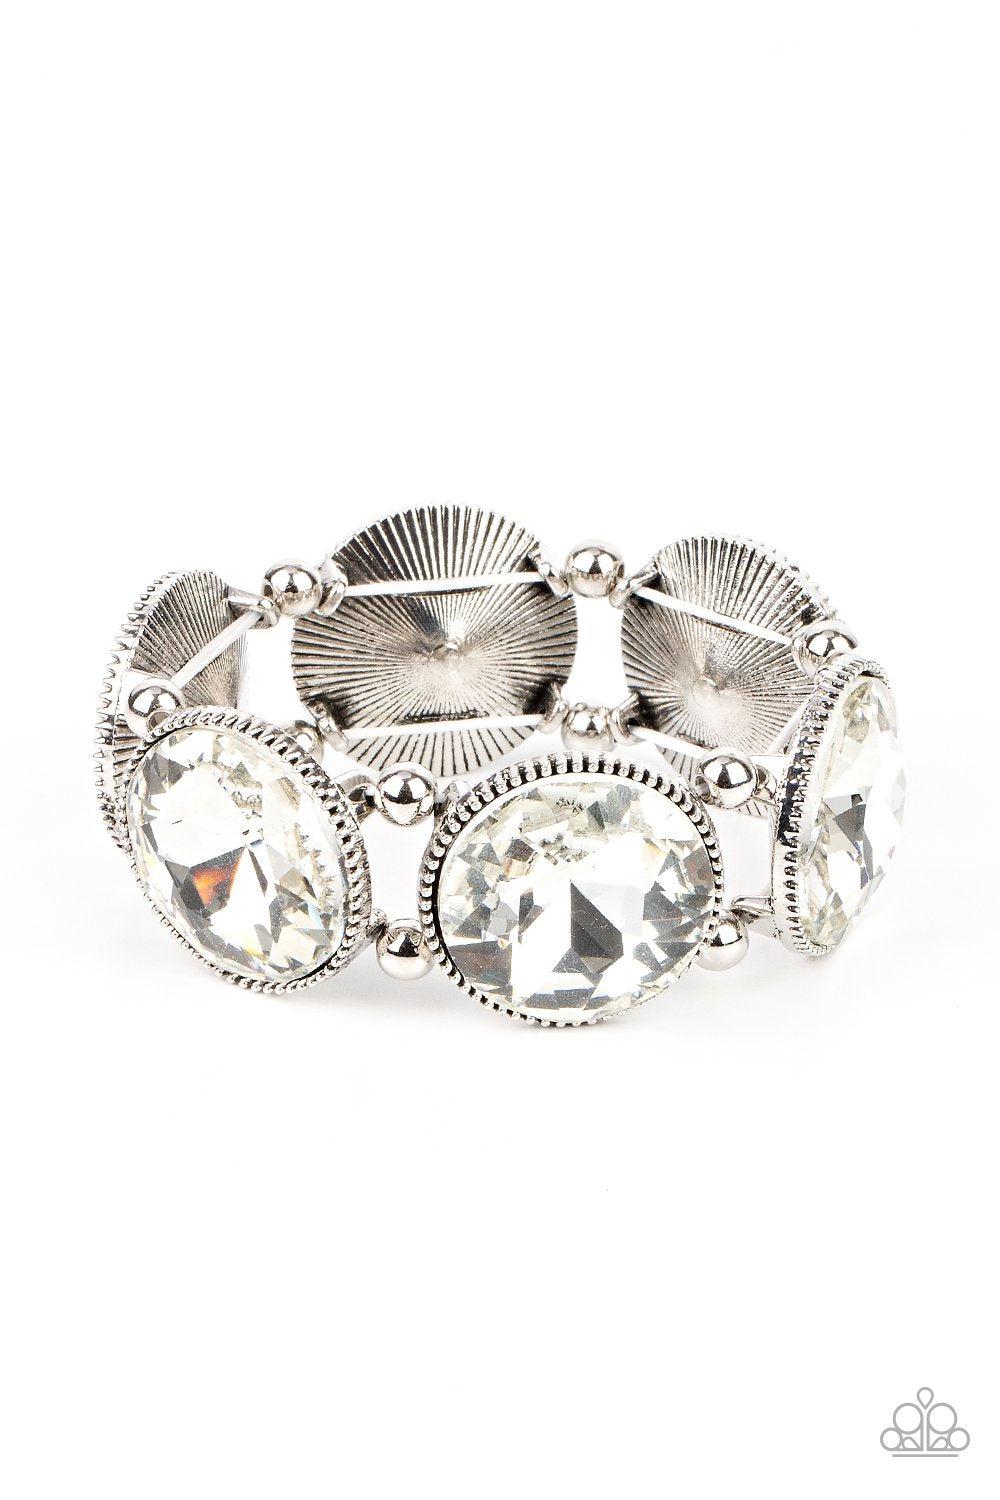 Powerhouse Hustle White Rhinestone Bracelet - Paparazzi Accessories Life of the Party Exclusive October 2021- lightbox - CarasShop.com - $5 Jewelry by Cara Jewels